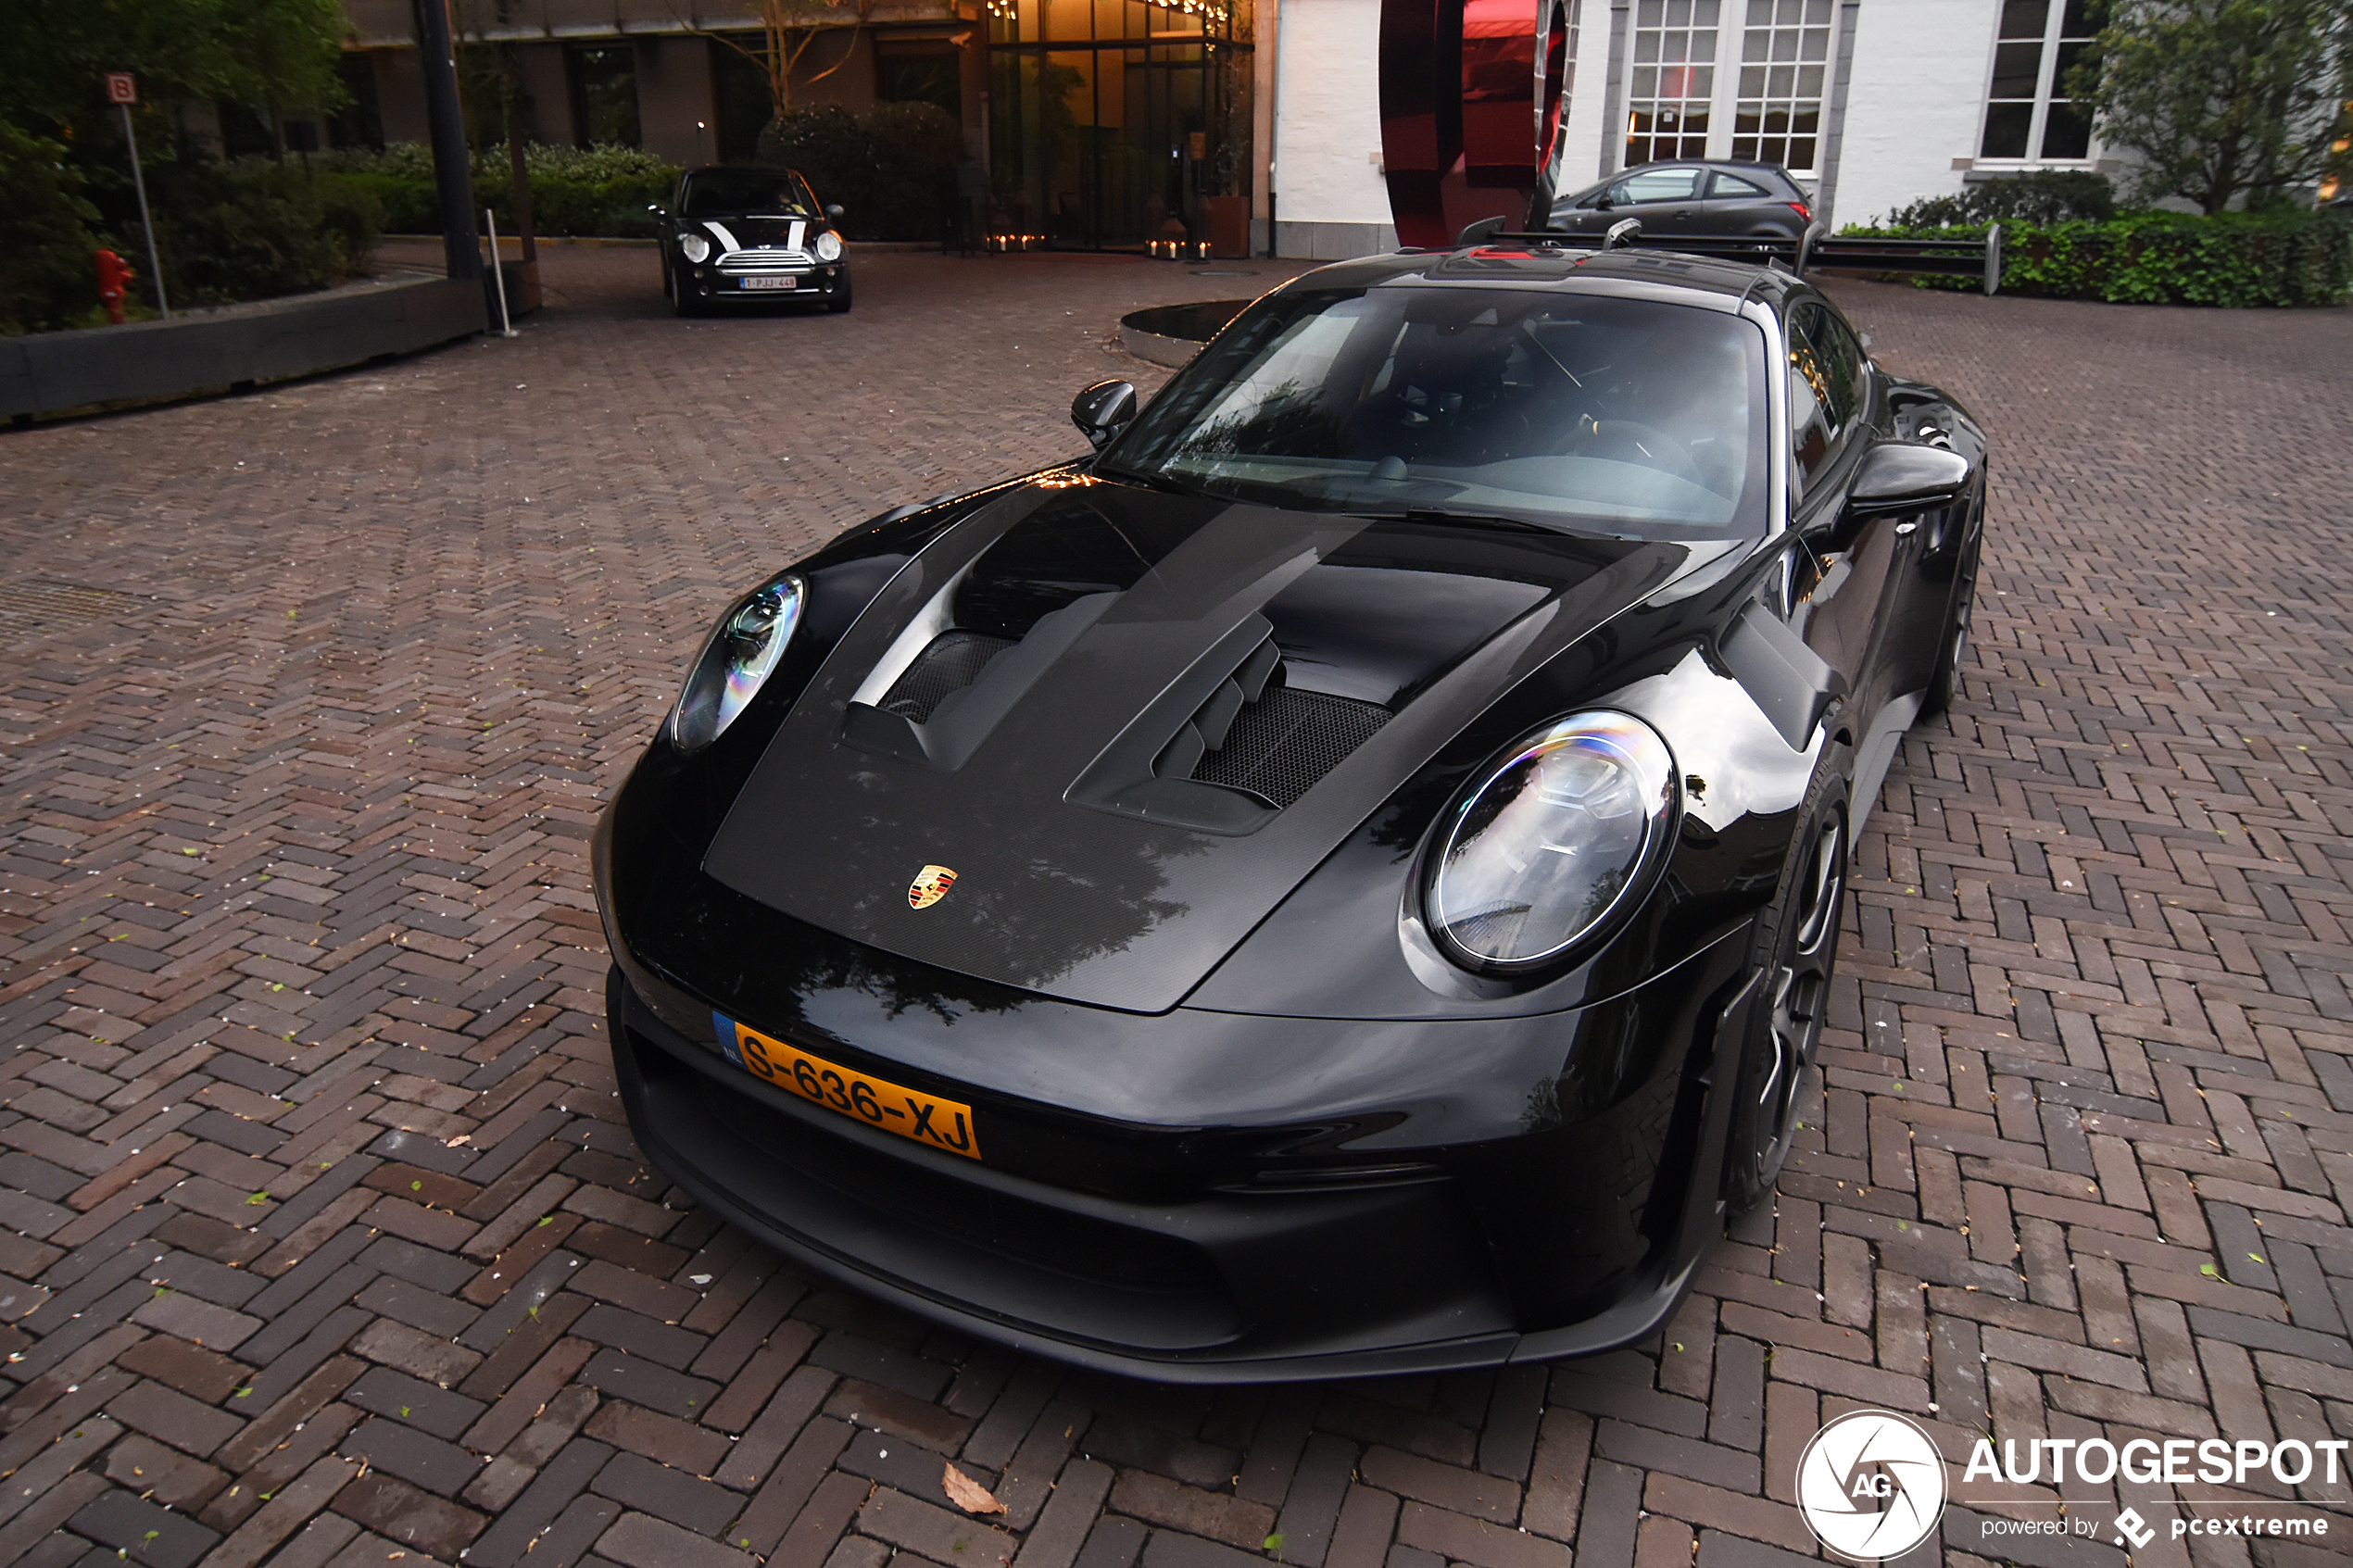 More and more Porsche 992 GT3 RS appear on the site